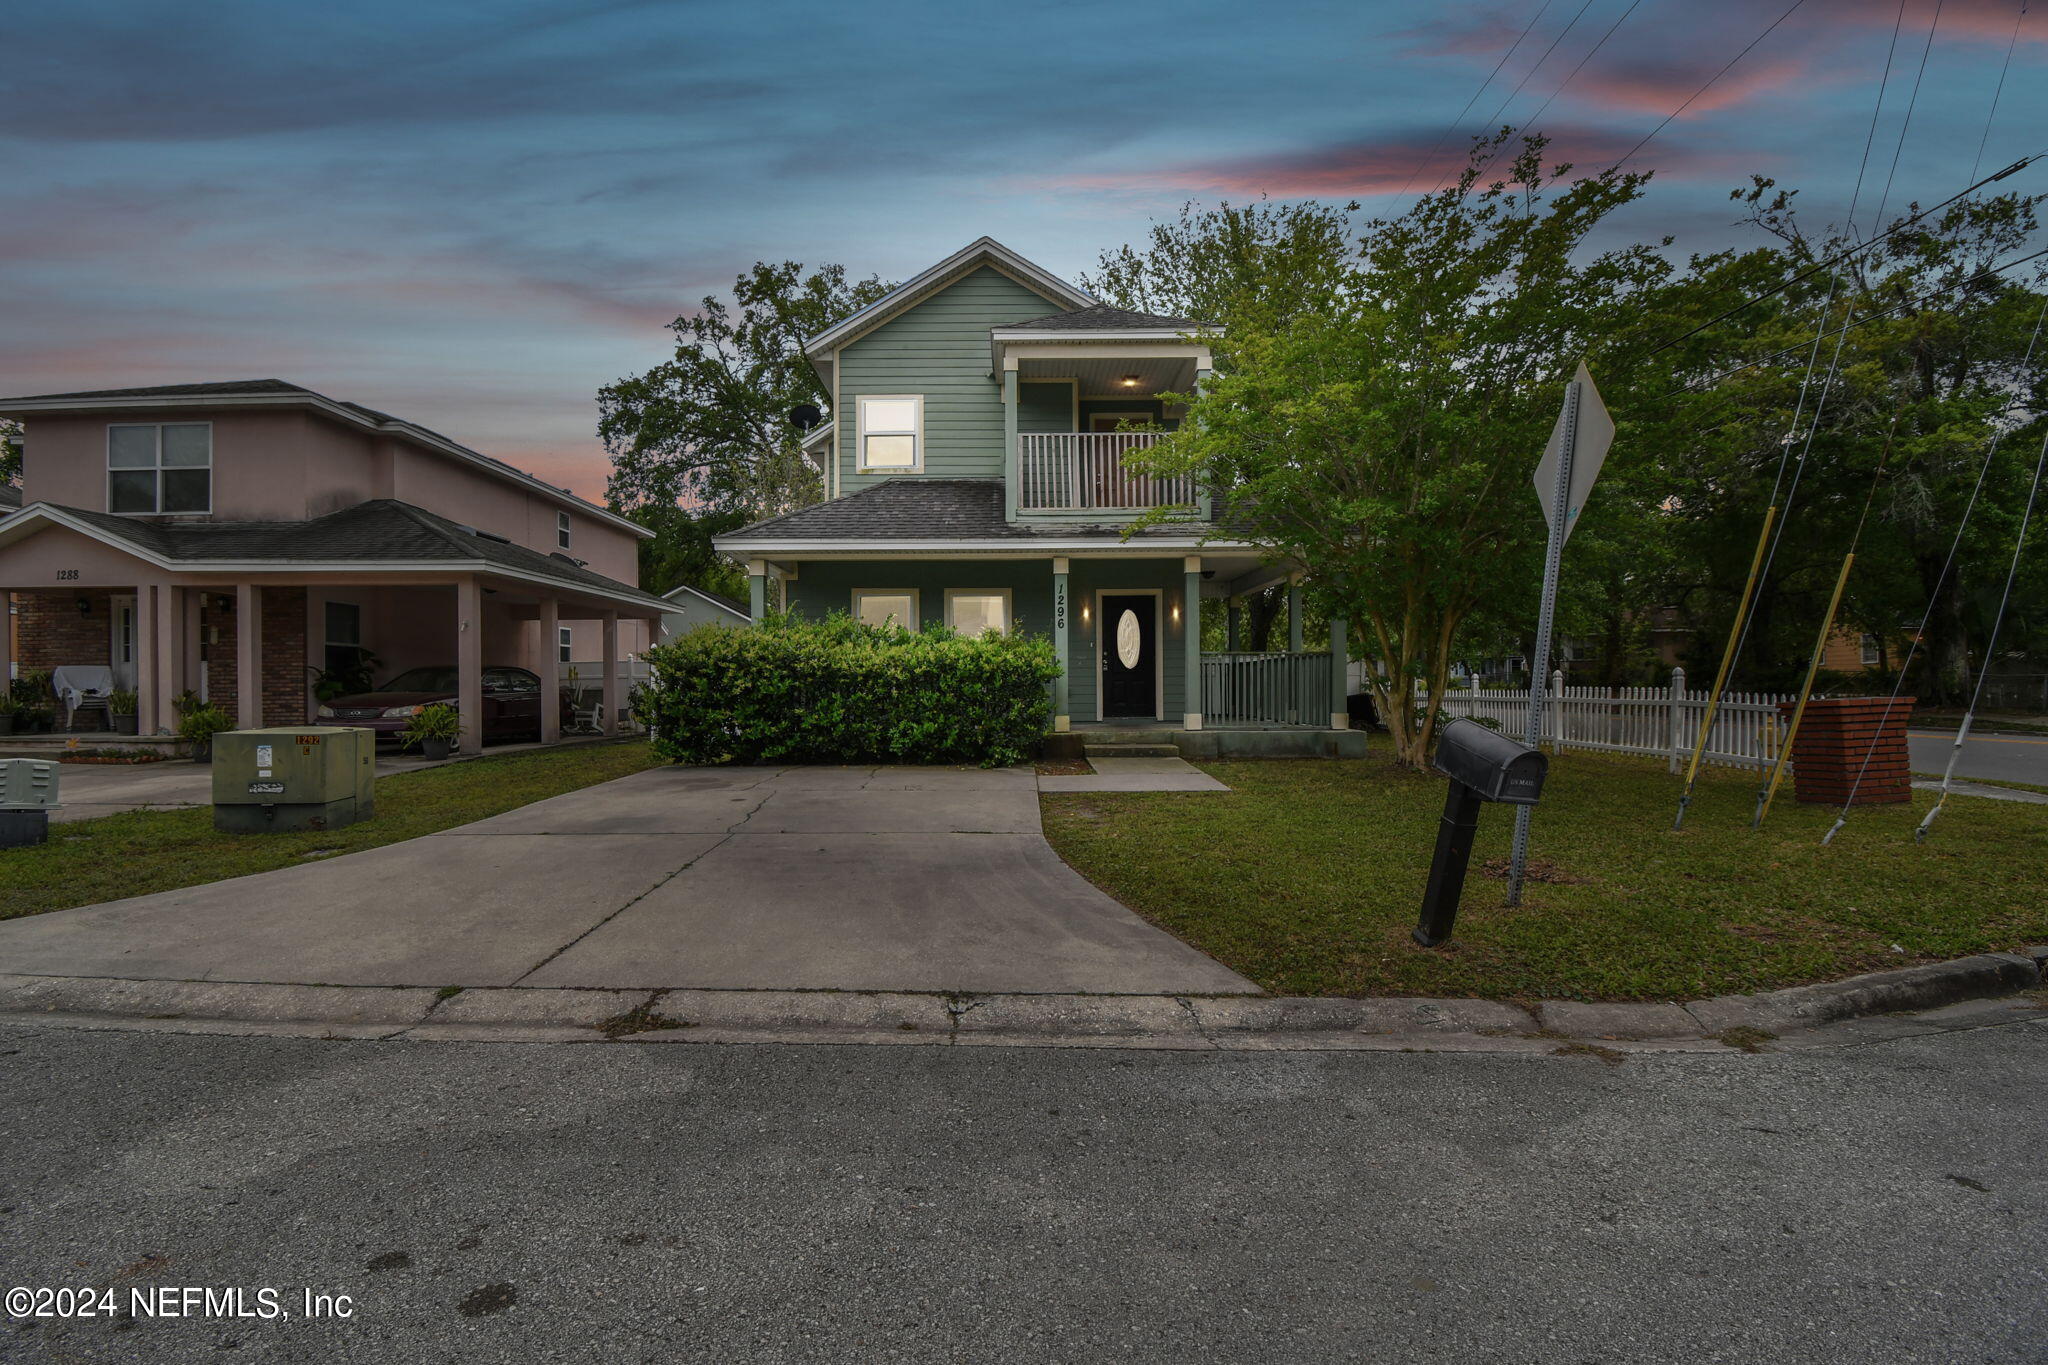 Jacksonville, FL home for sale located at 1296 W 33rd Street, Jacksonville, FL 32209